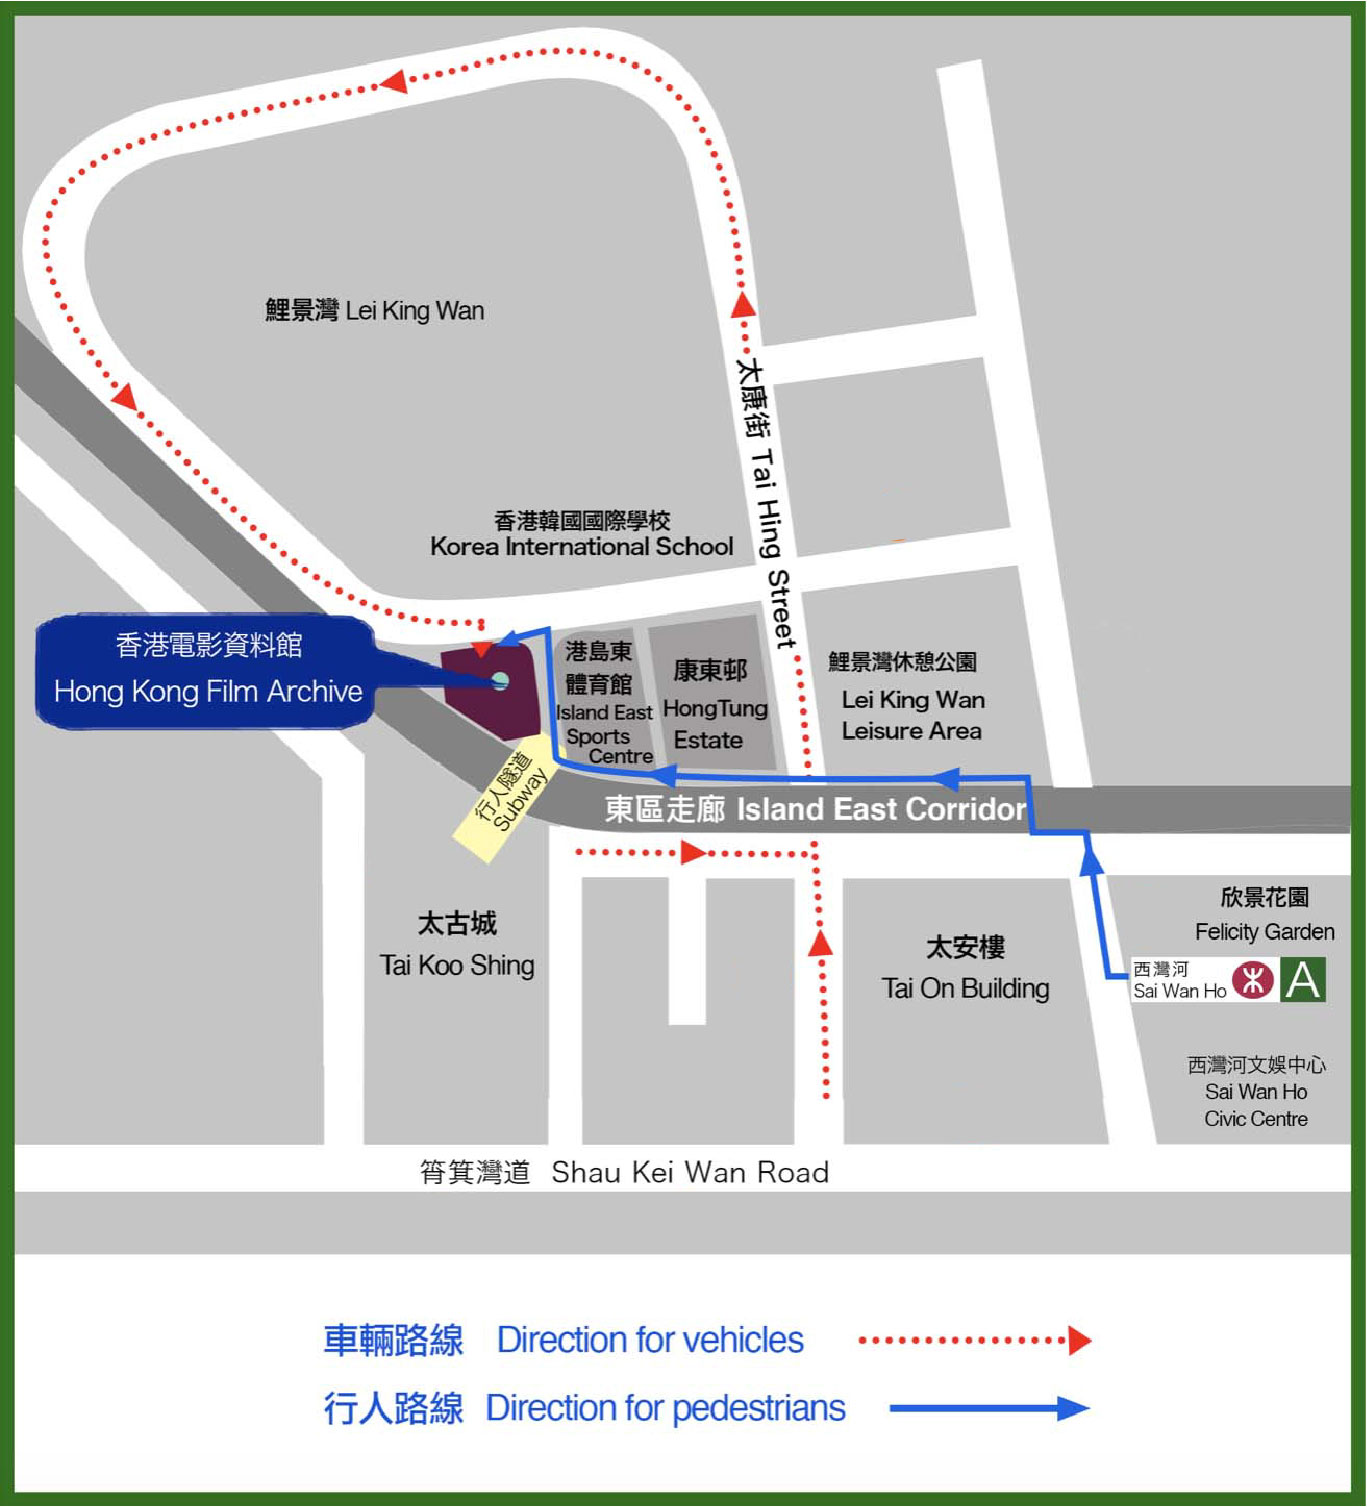 Hong Kong Film Archive Location Map Direction for vehicles: Head to the Tai Hong Street and Lei King Road to the Archive. Direction for pedestrains: Alight at Sai Wan Ho MTR Station, take the Exit A and walk along Tai On Street, Oi Shun Road and Lei King Road to the Archive.